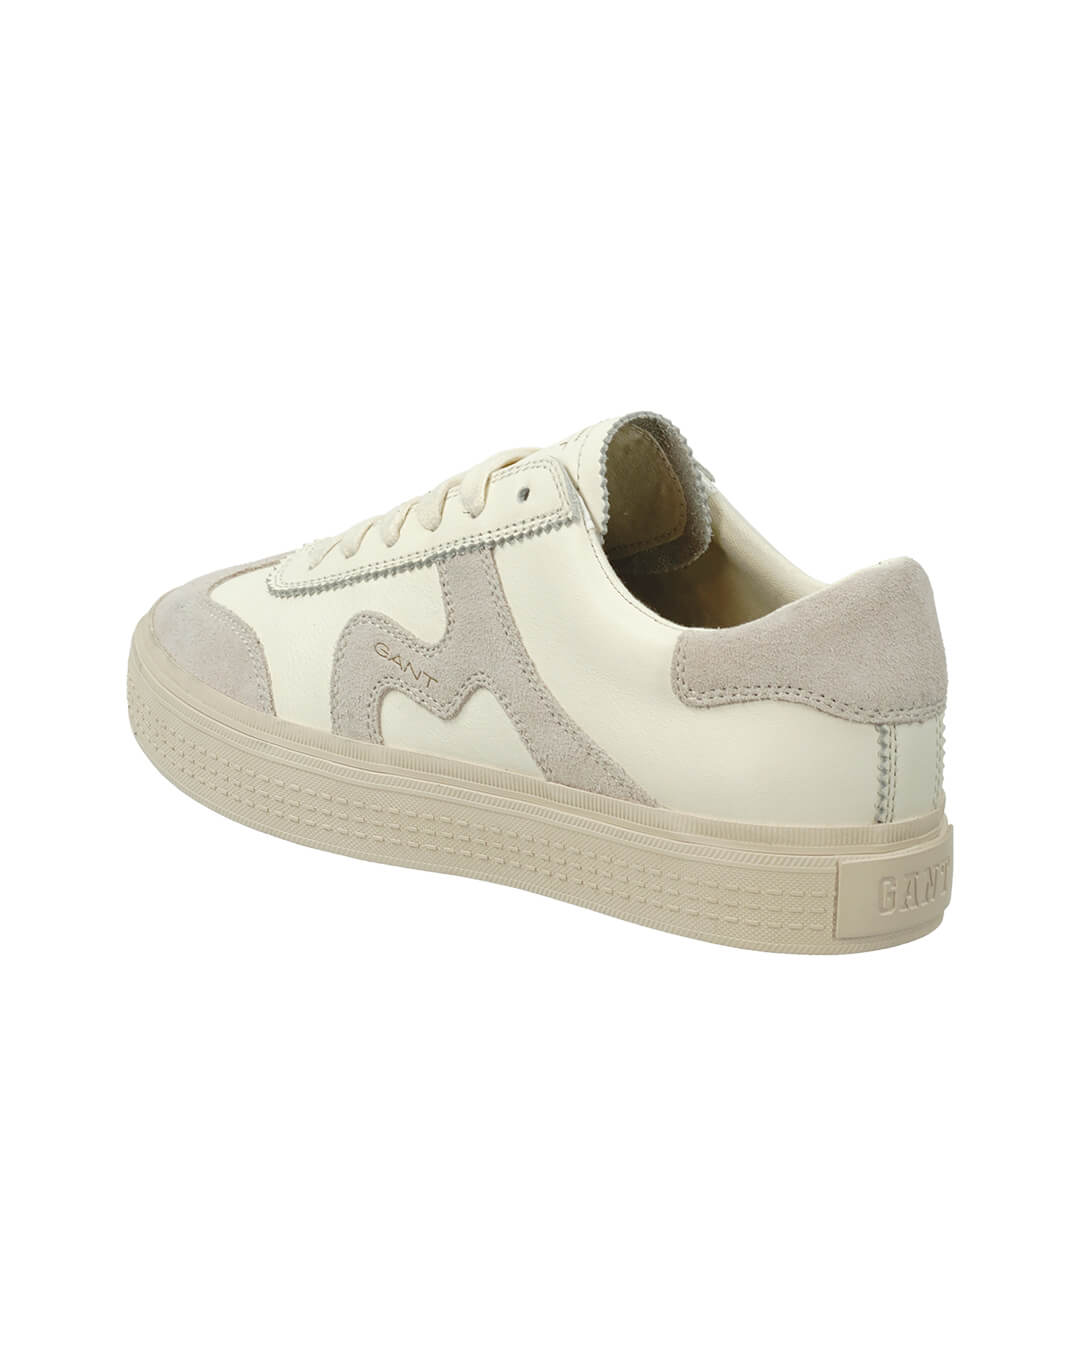 Gant Shoes Gant Off White Carroly Sneakers